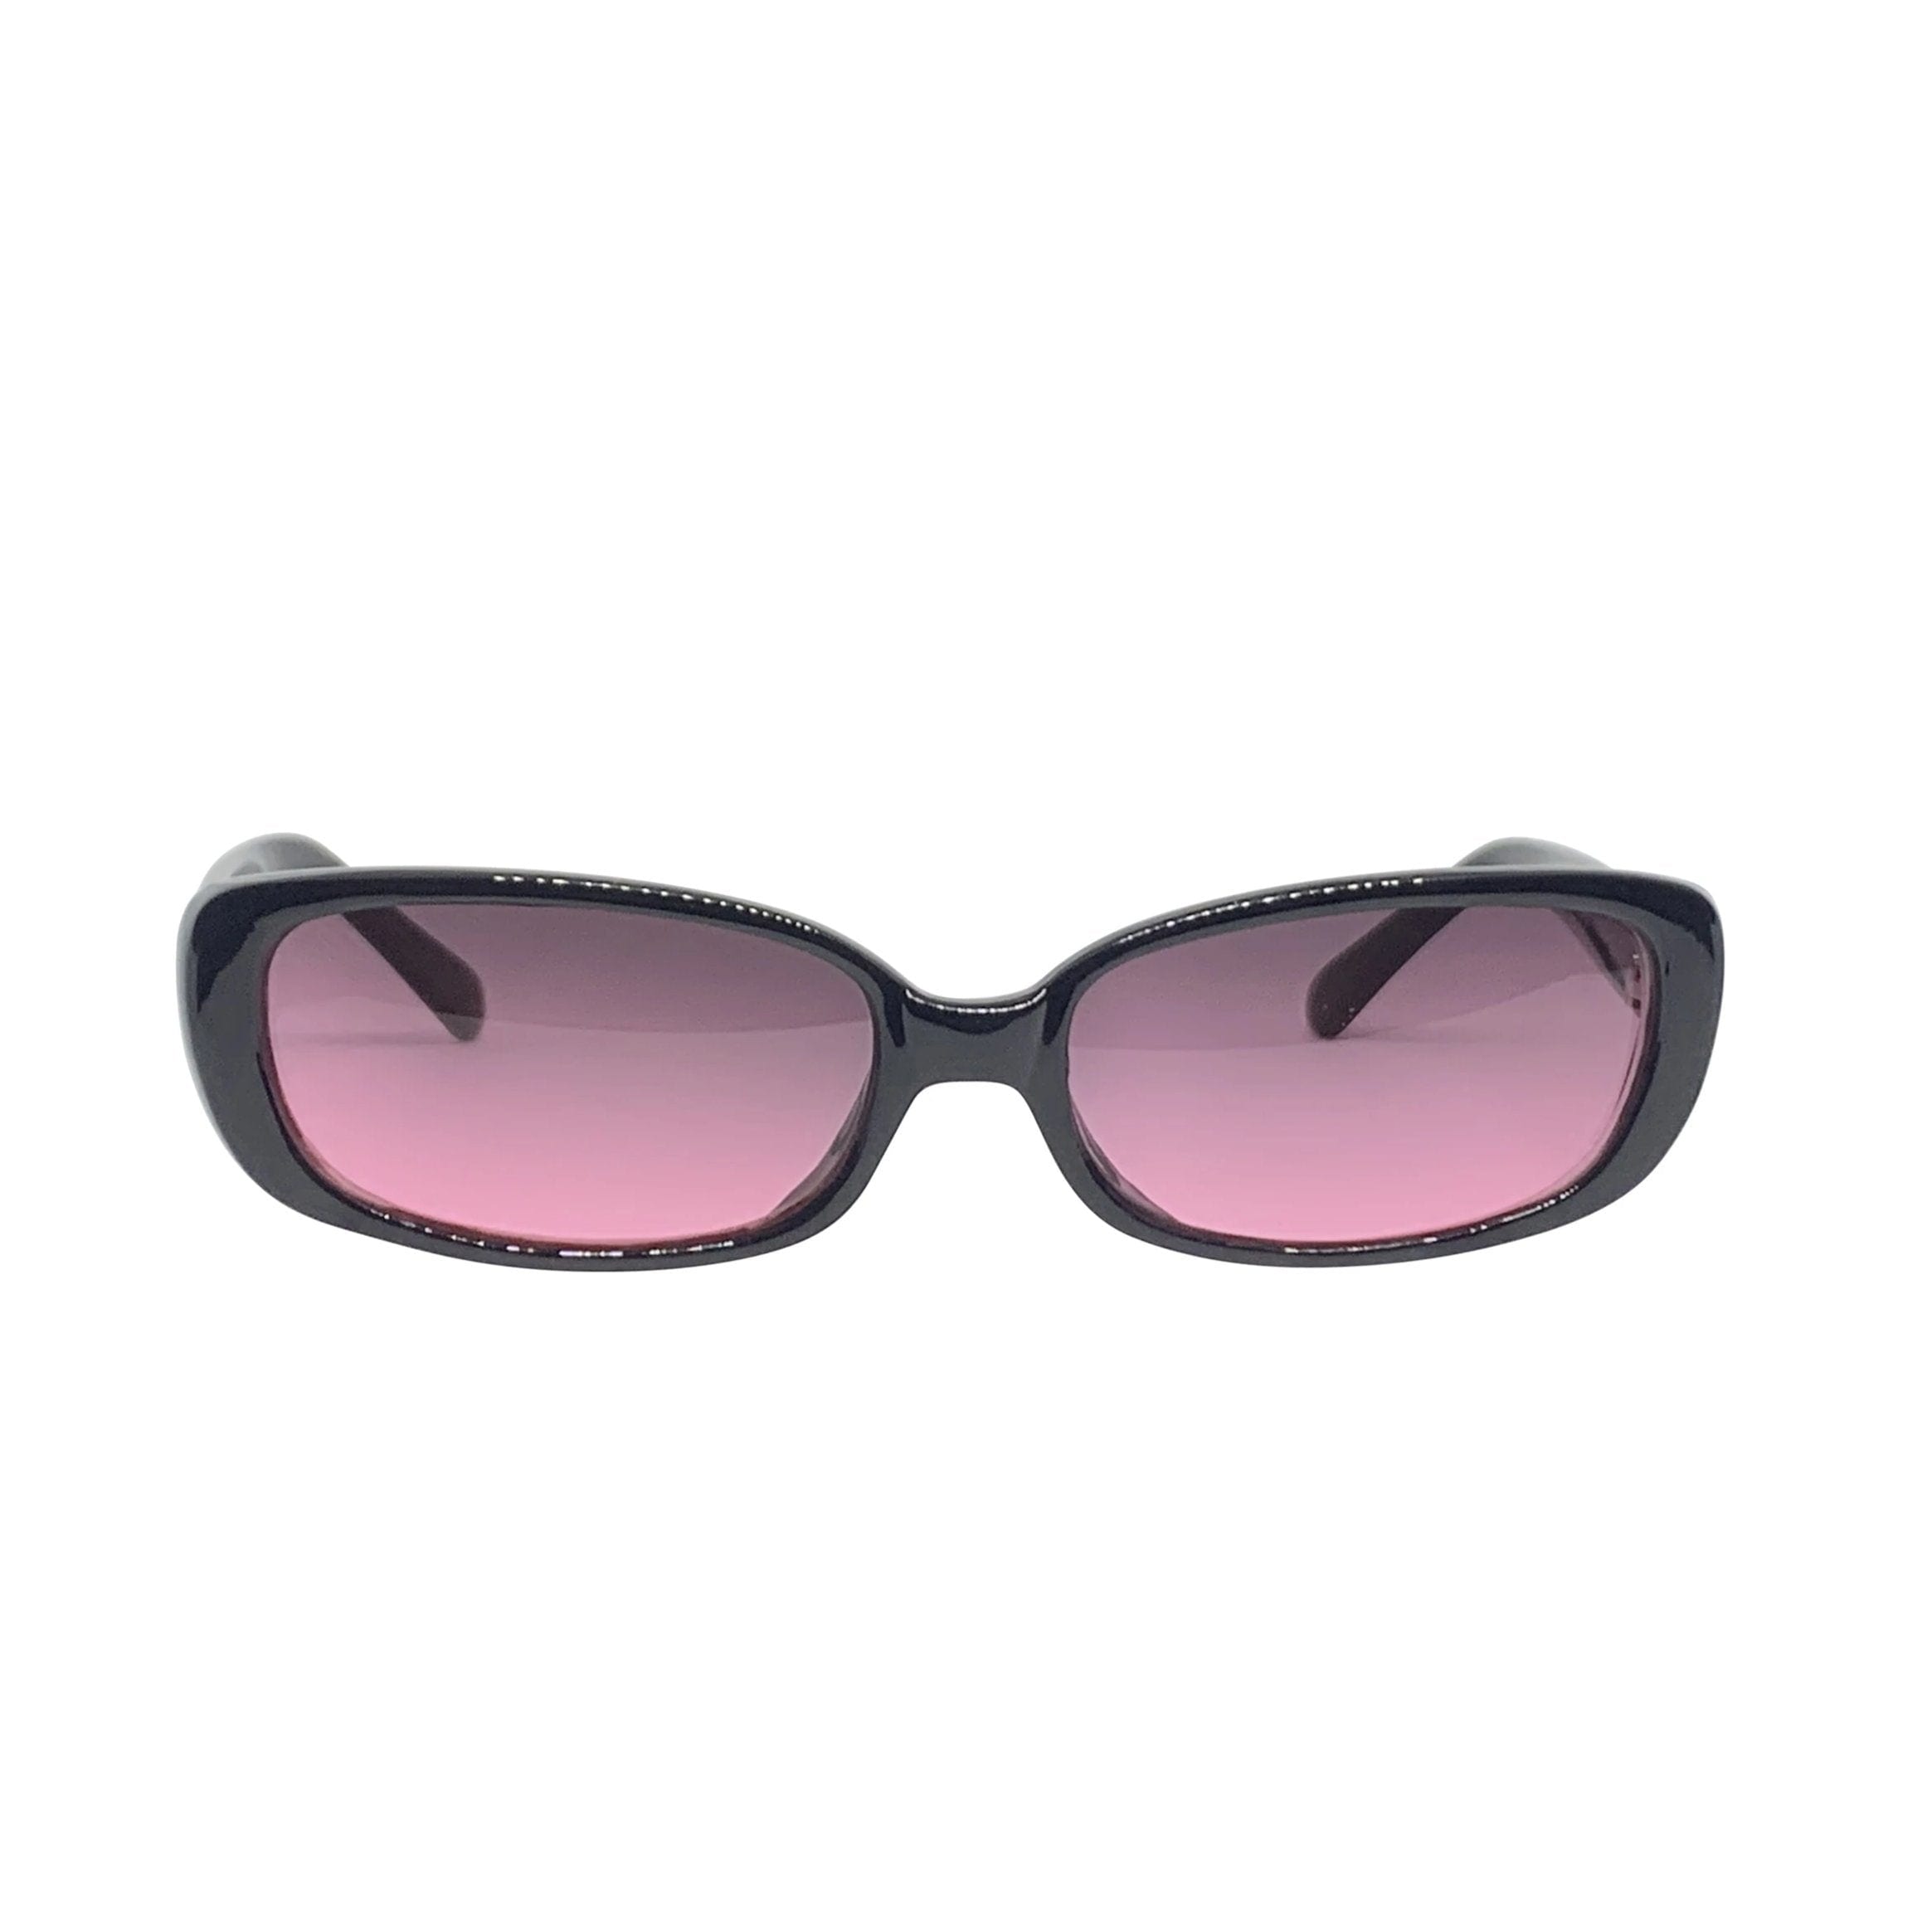 BUGGIN’ Black and Pink 90s Square Sunnies